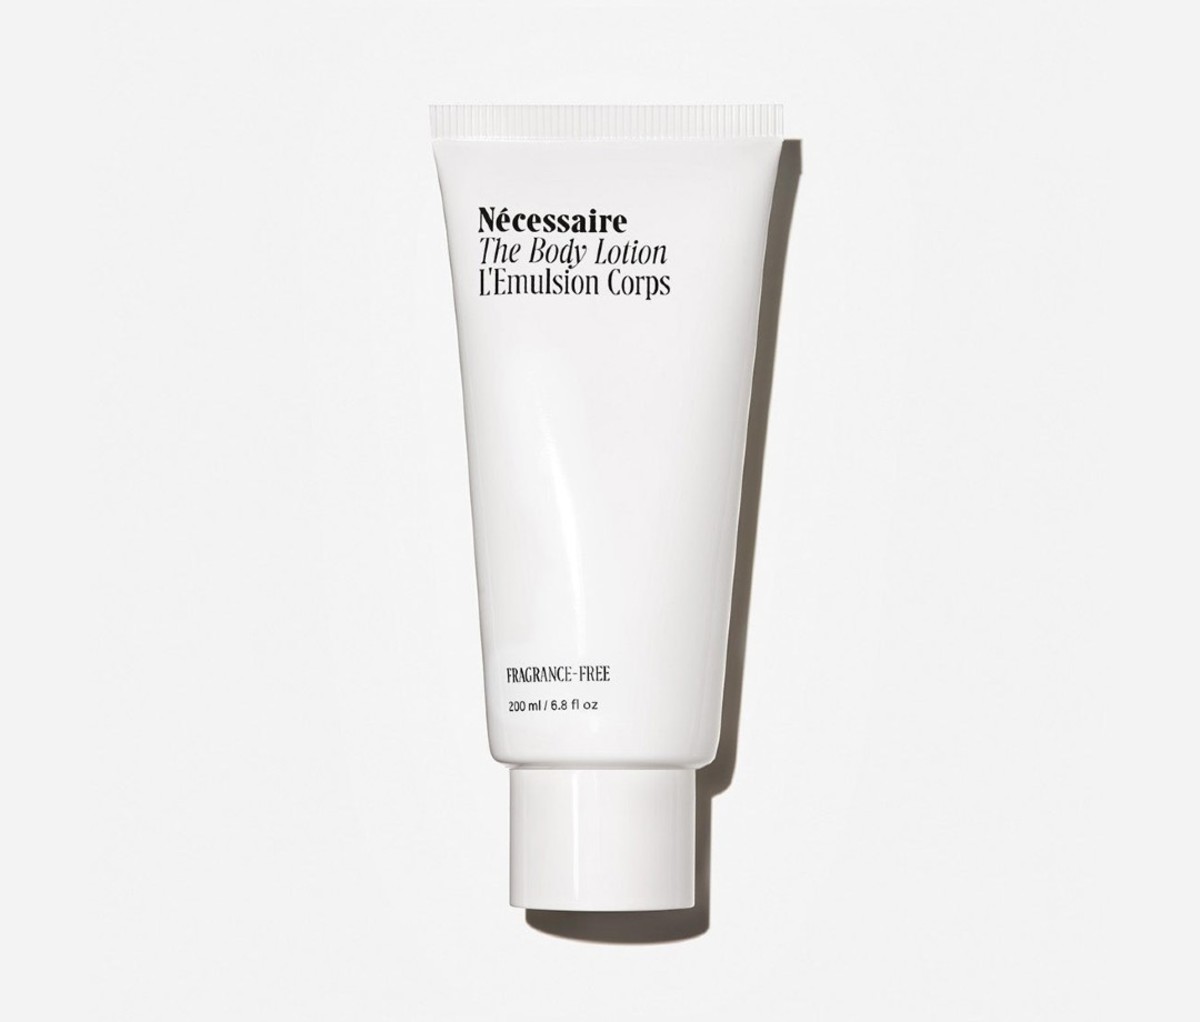 The Body Lotion by Nécessaire